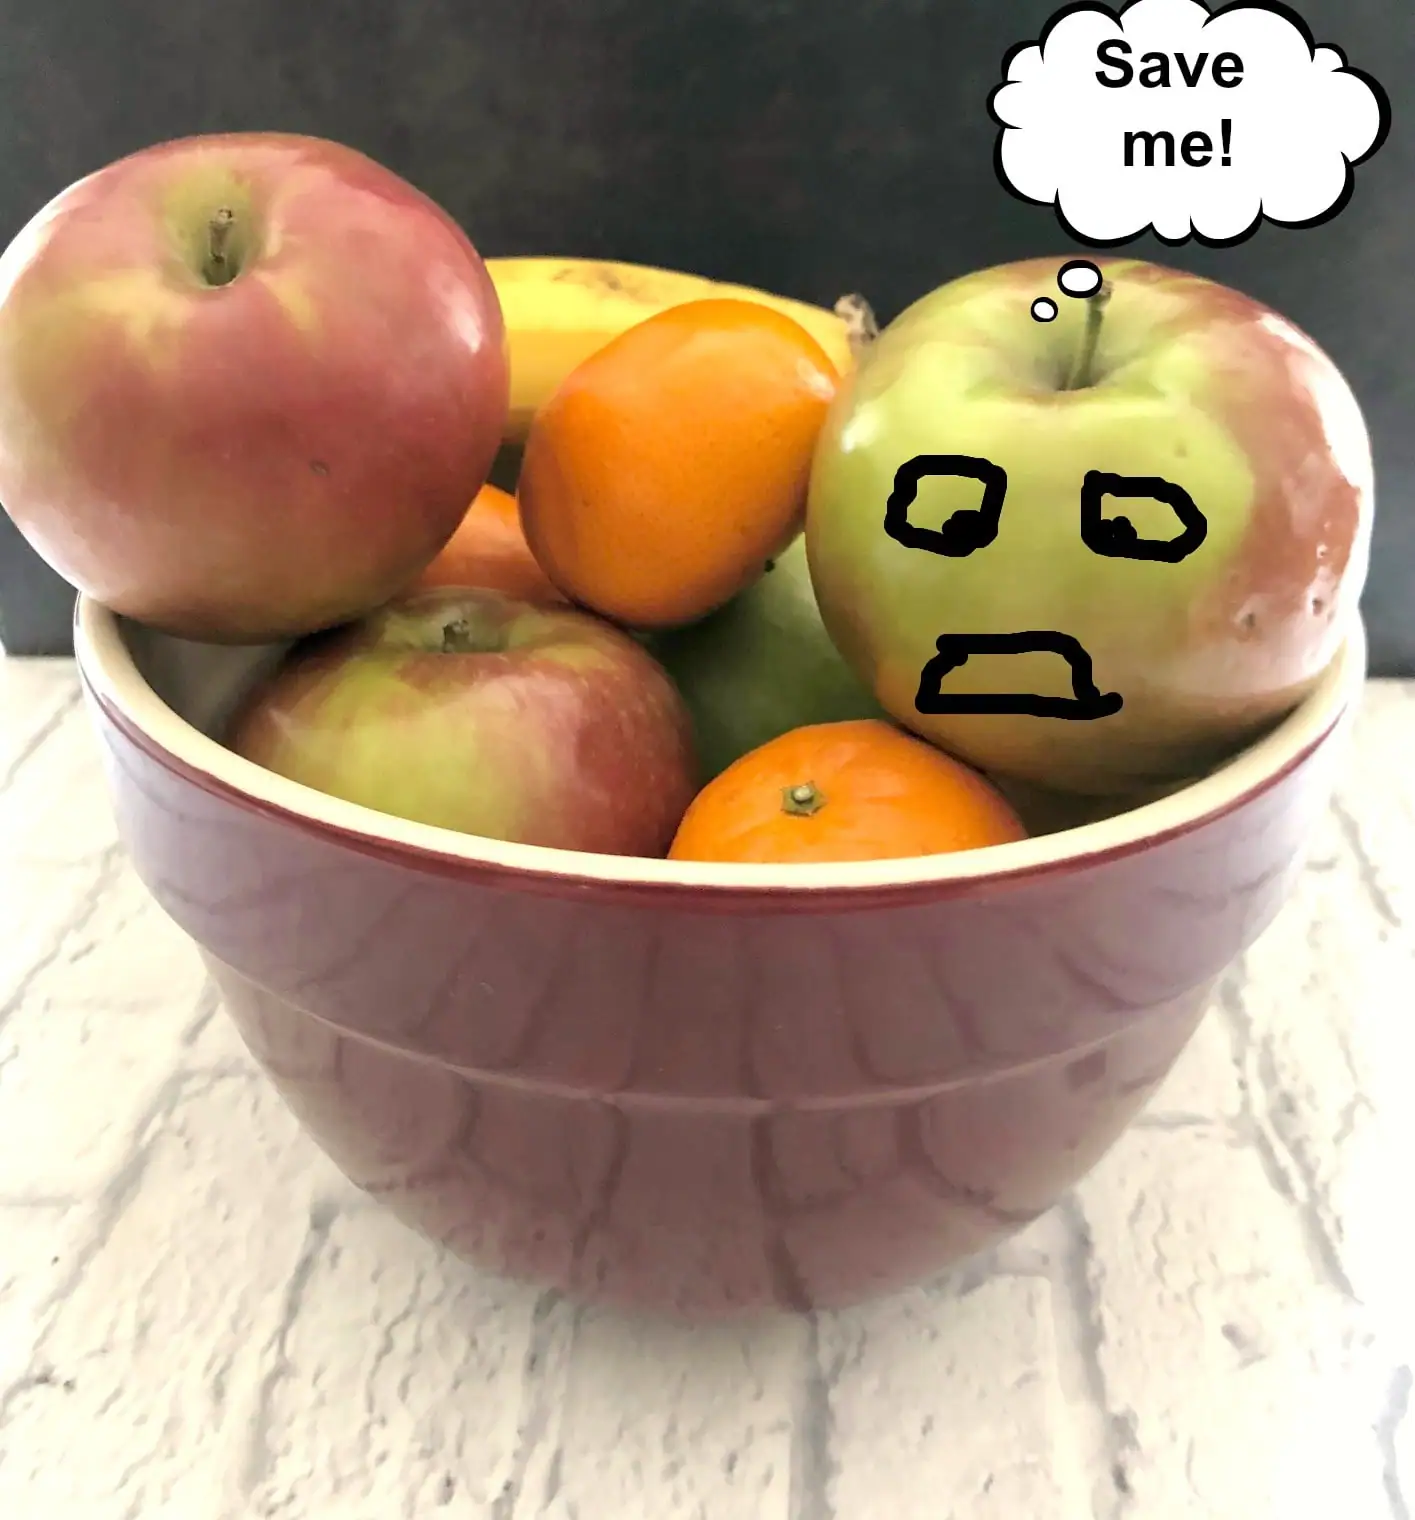 Fruit in a bowl with a word bubble from the apple saying 'save me' and black hand drawn distressed face on apple